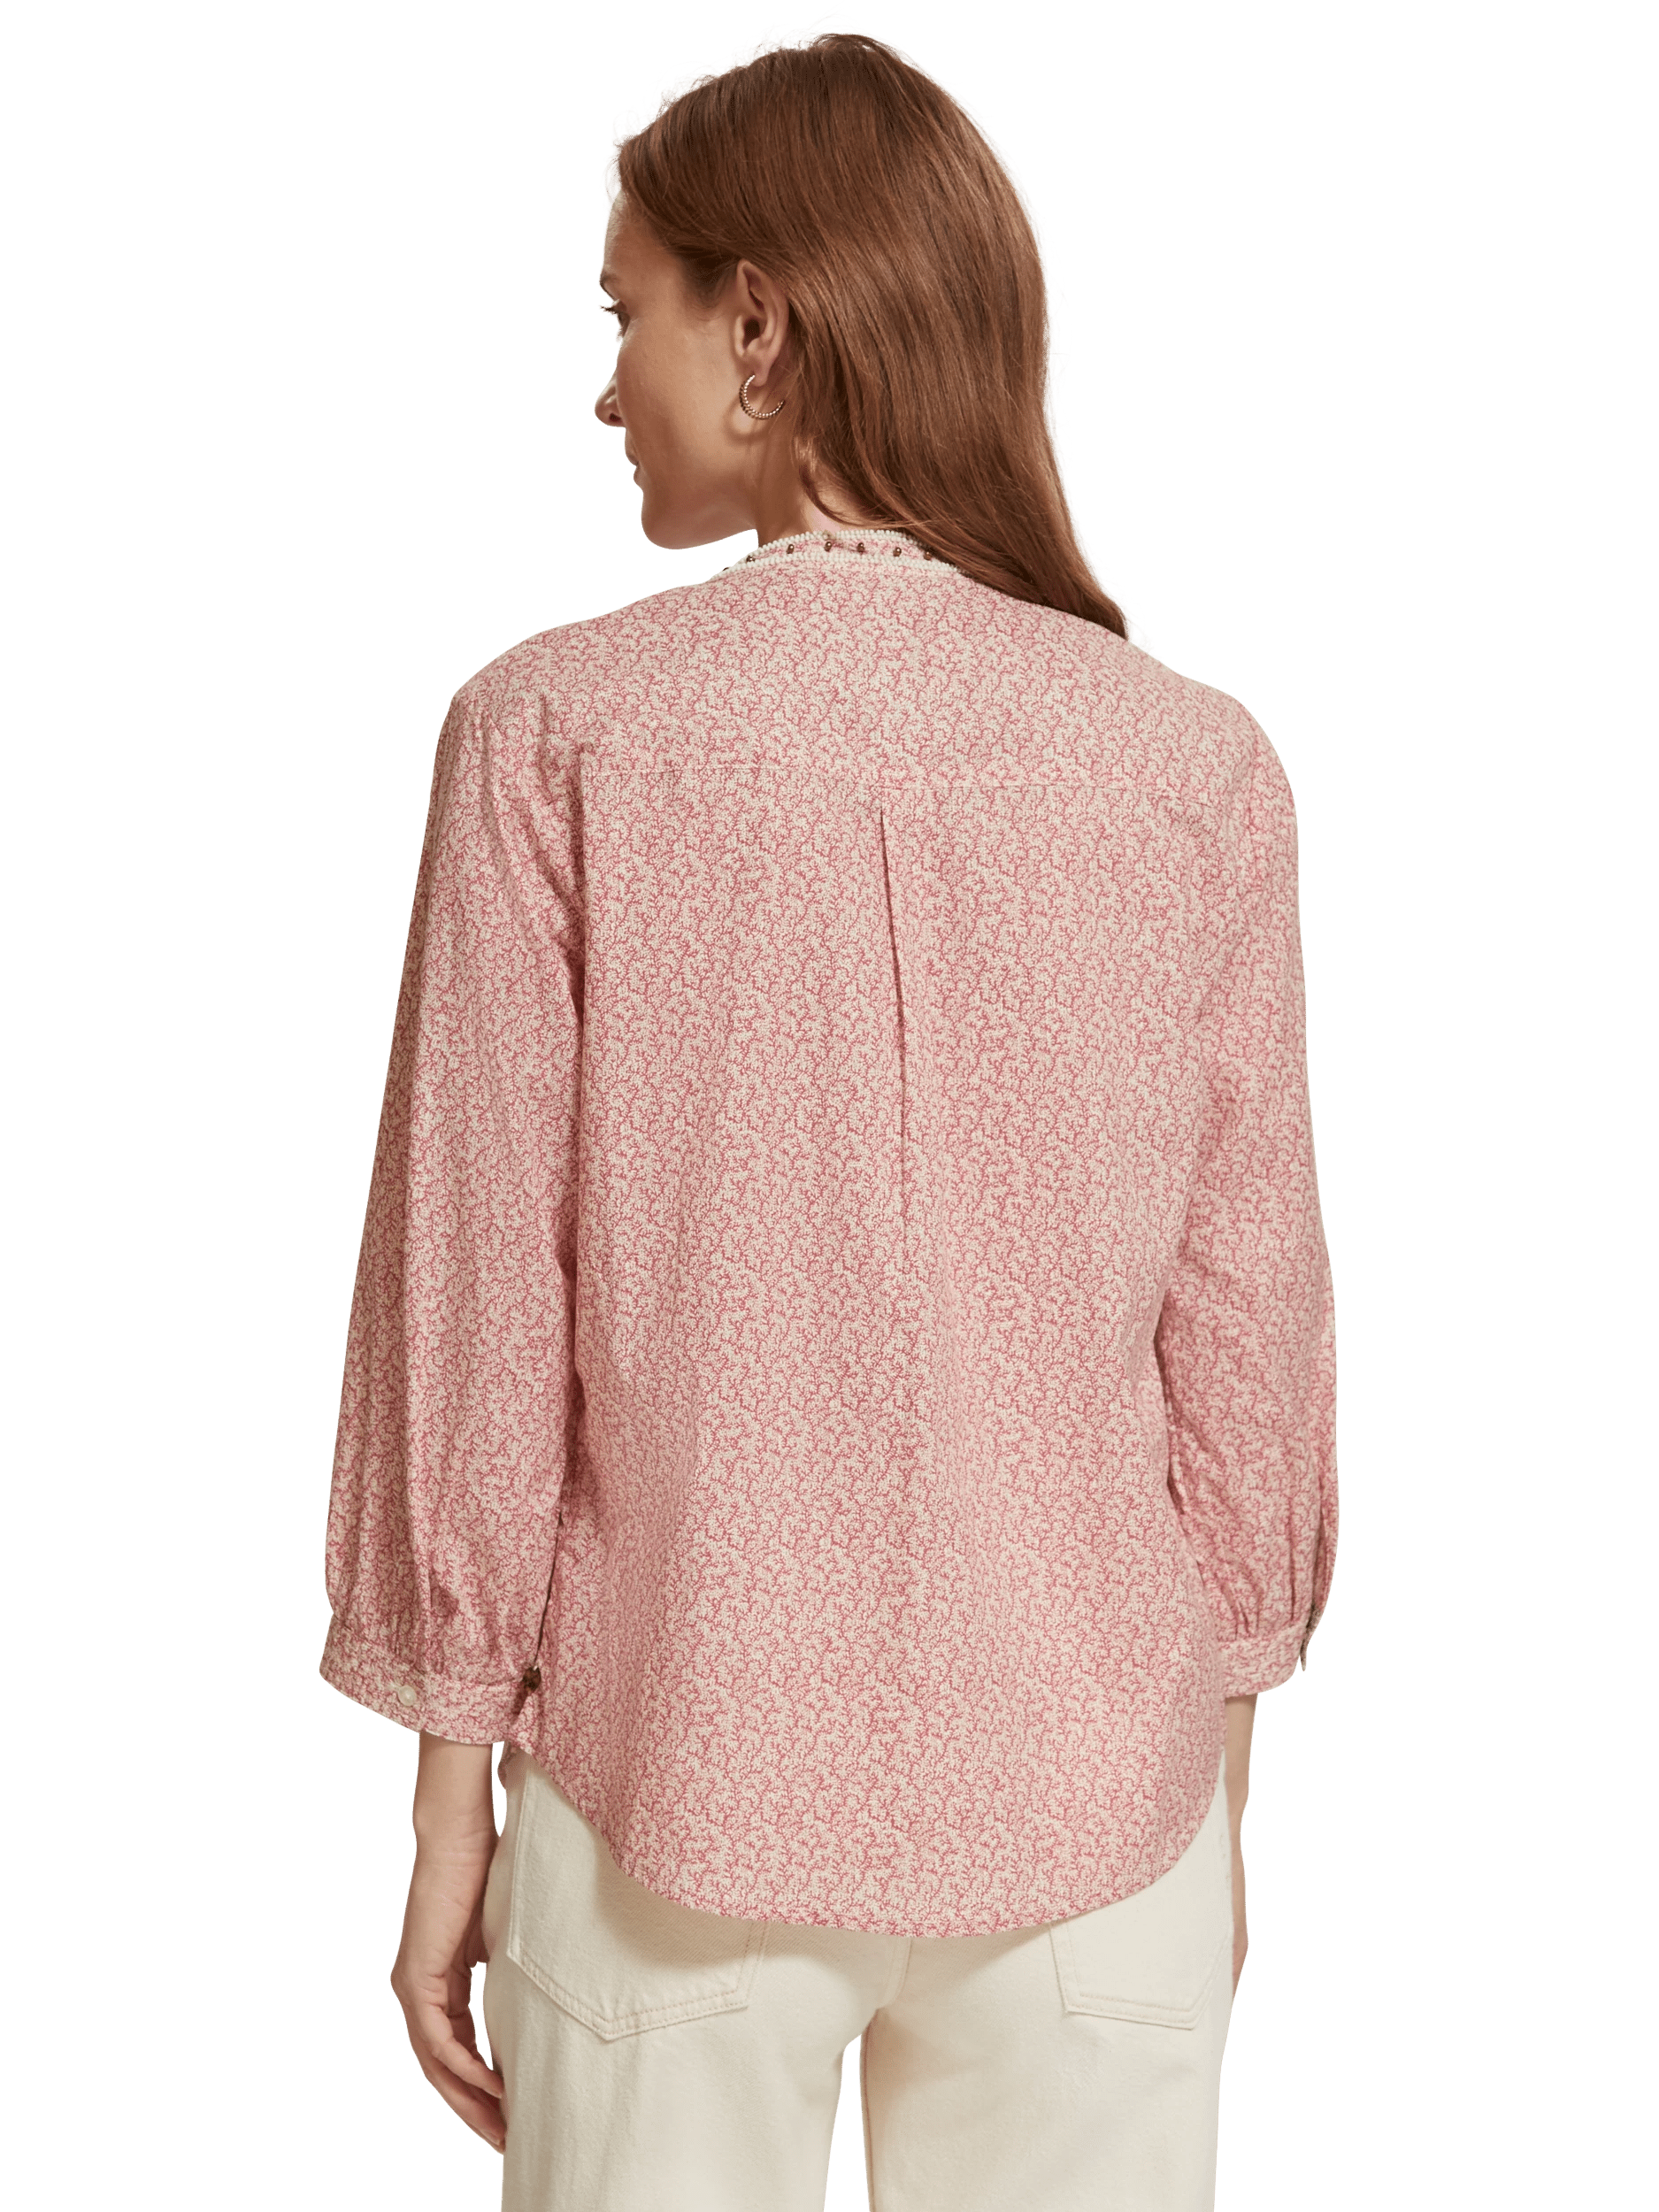 Scotch & Soda ¾ sleeves printed blouse MDL-BCK